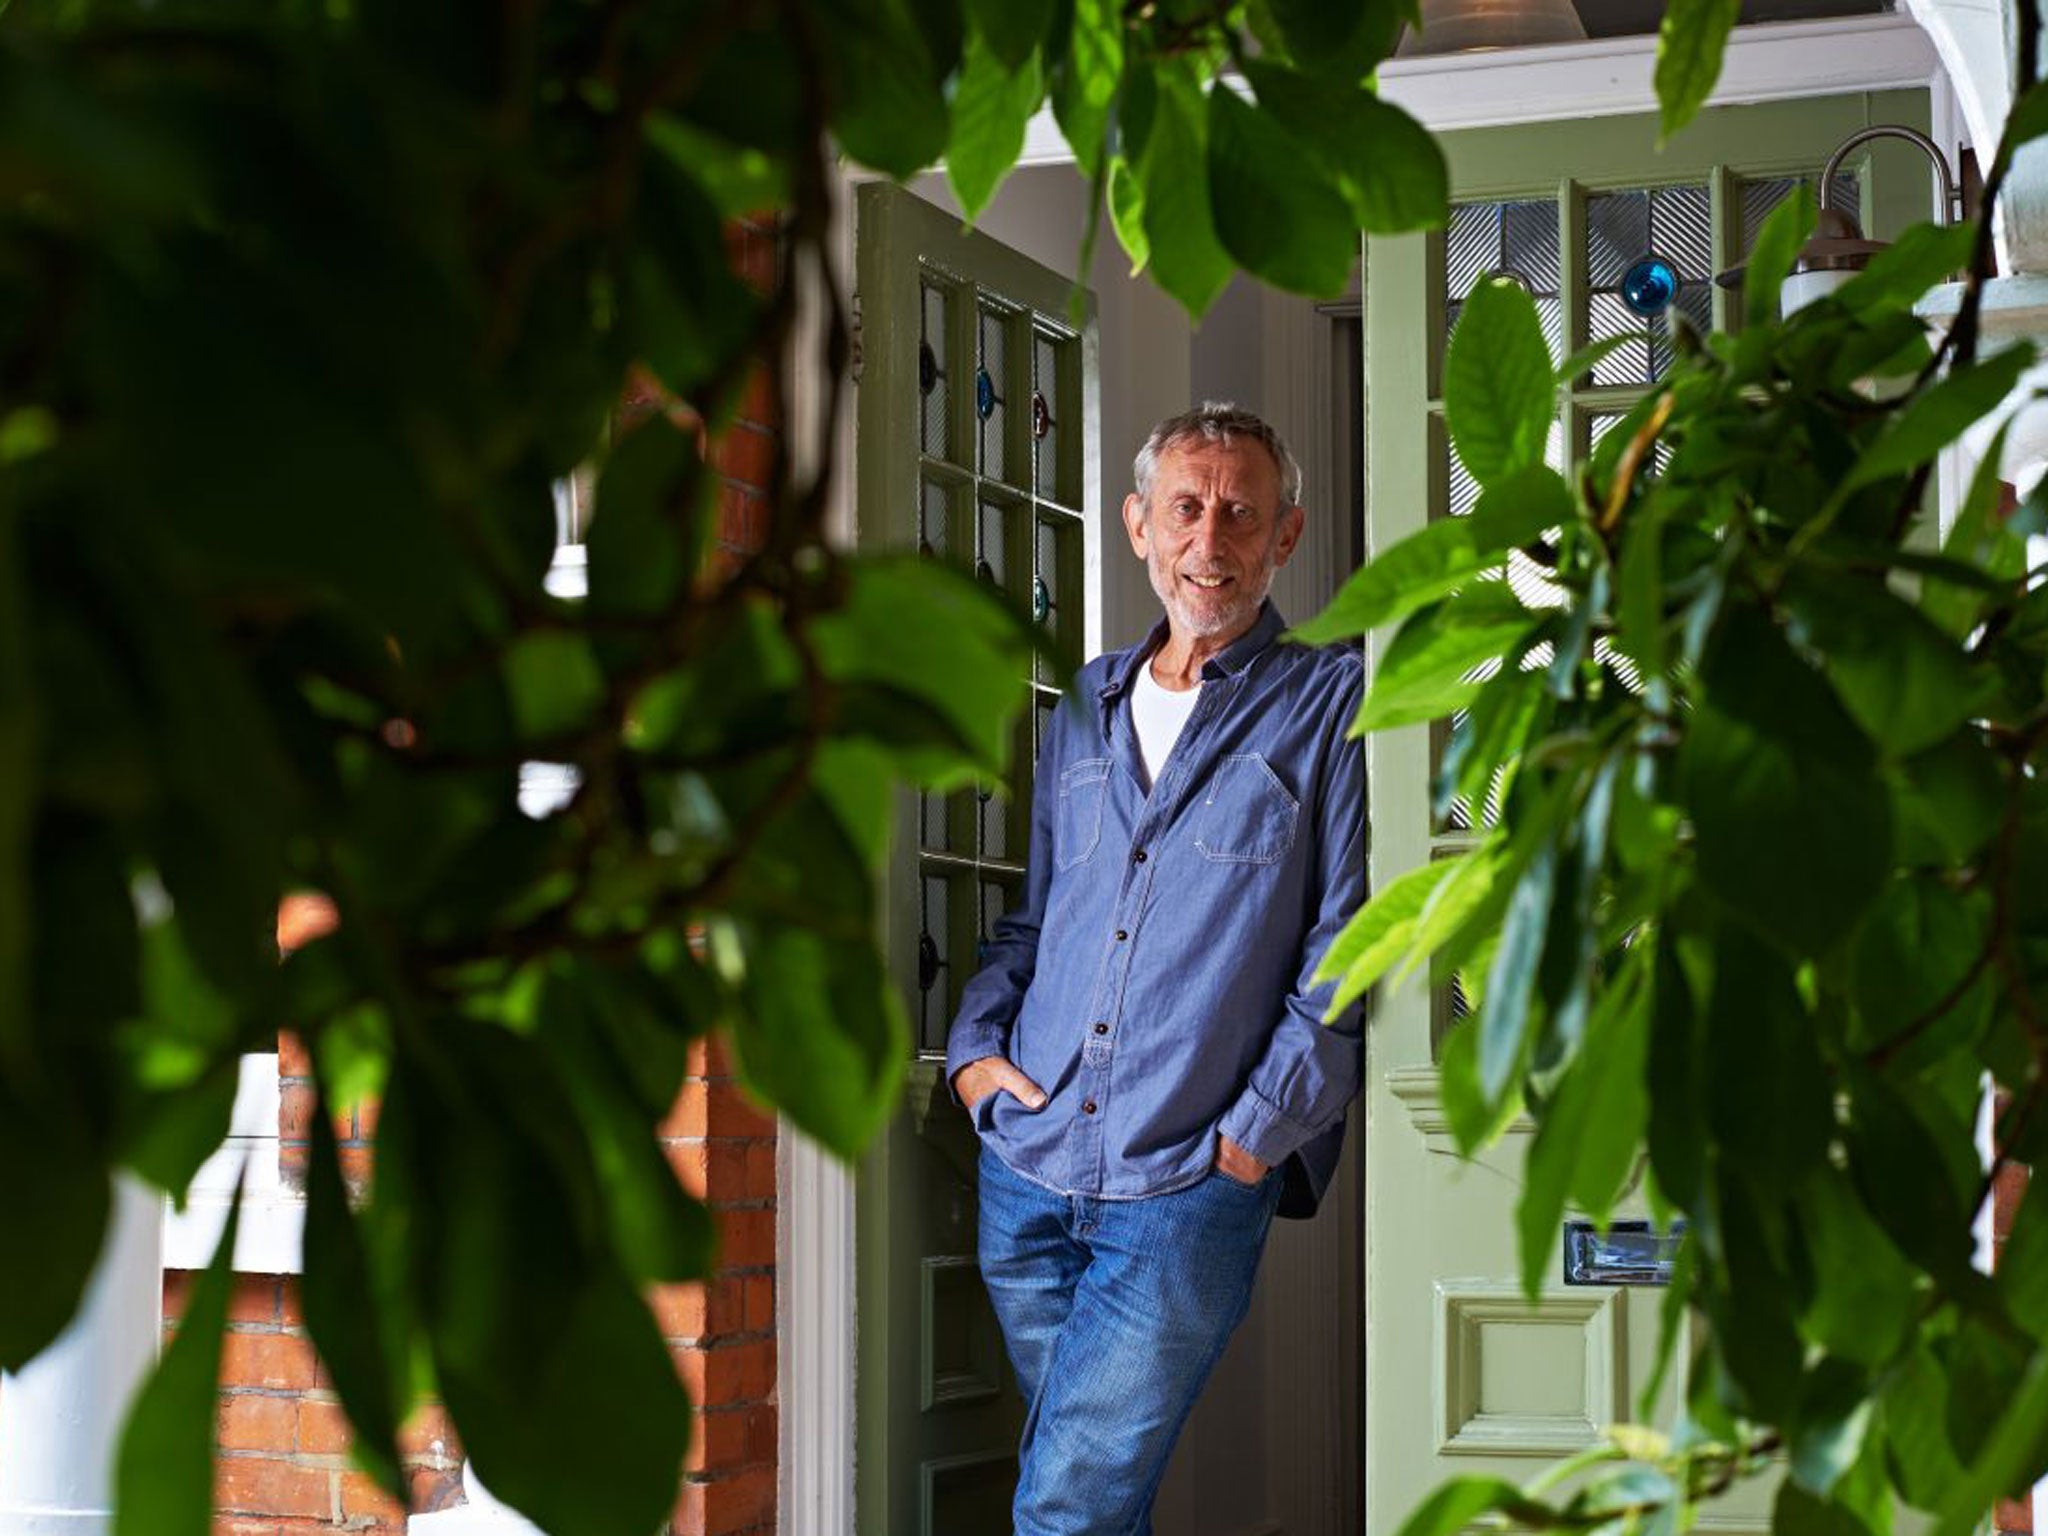 Michael Rosen, the former Children’s Laureate, has shared his views on education in a book aimed at parents